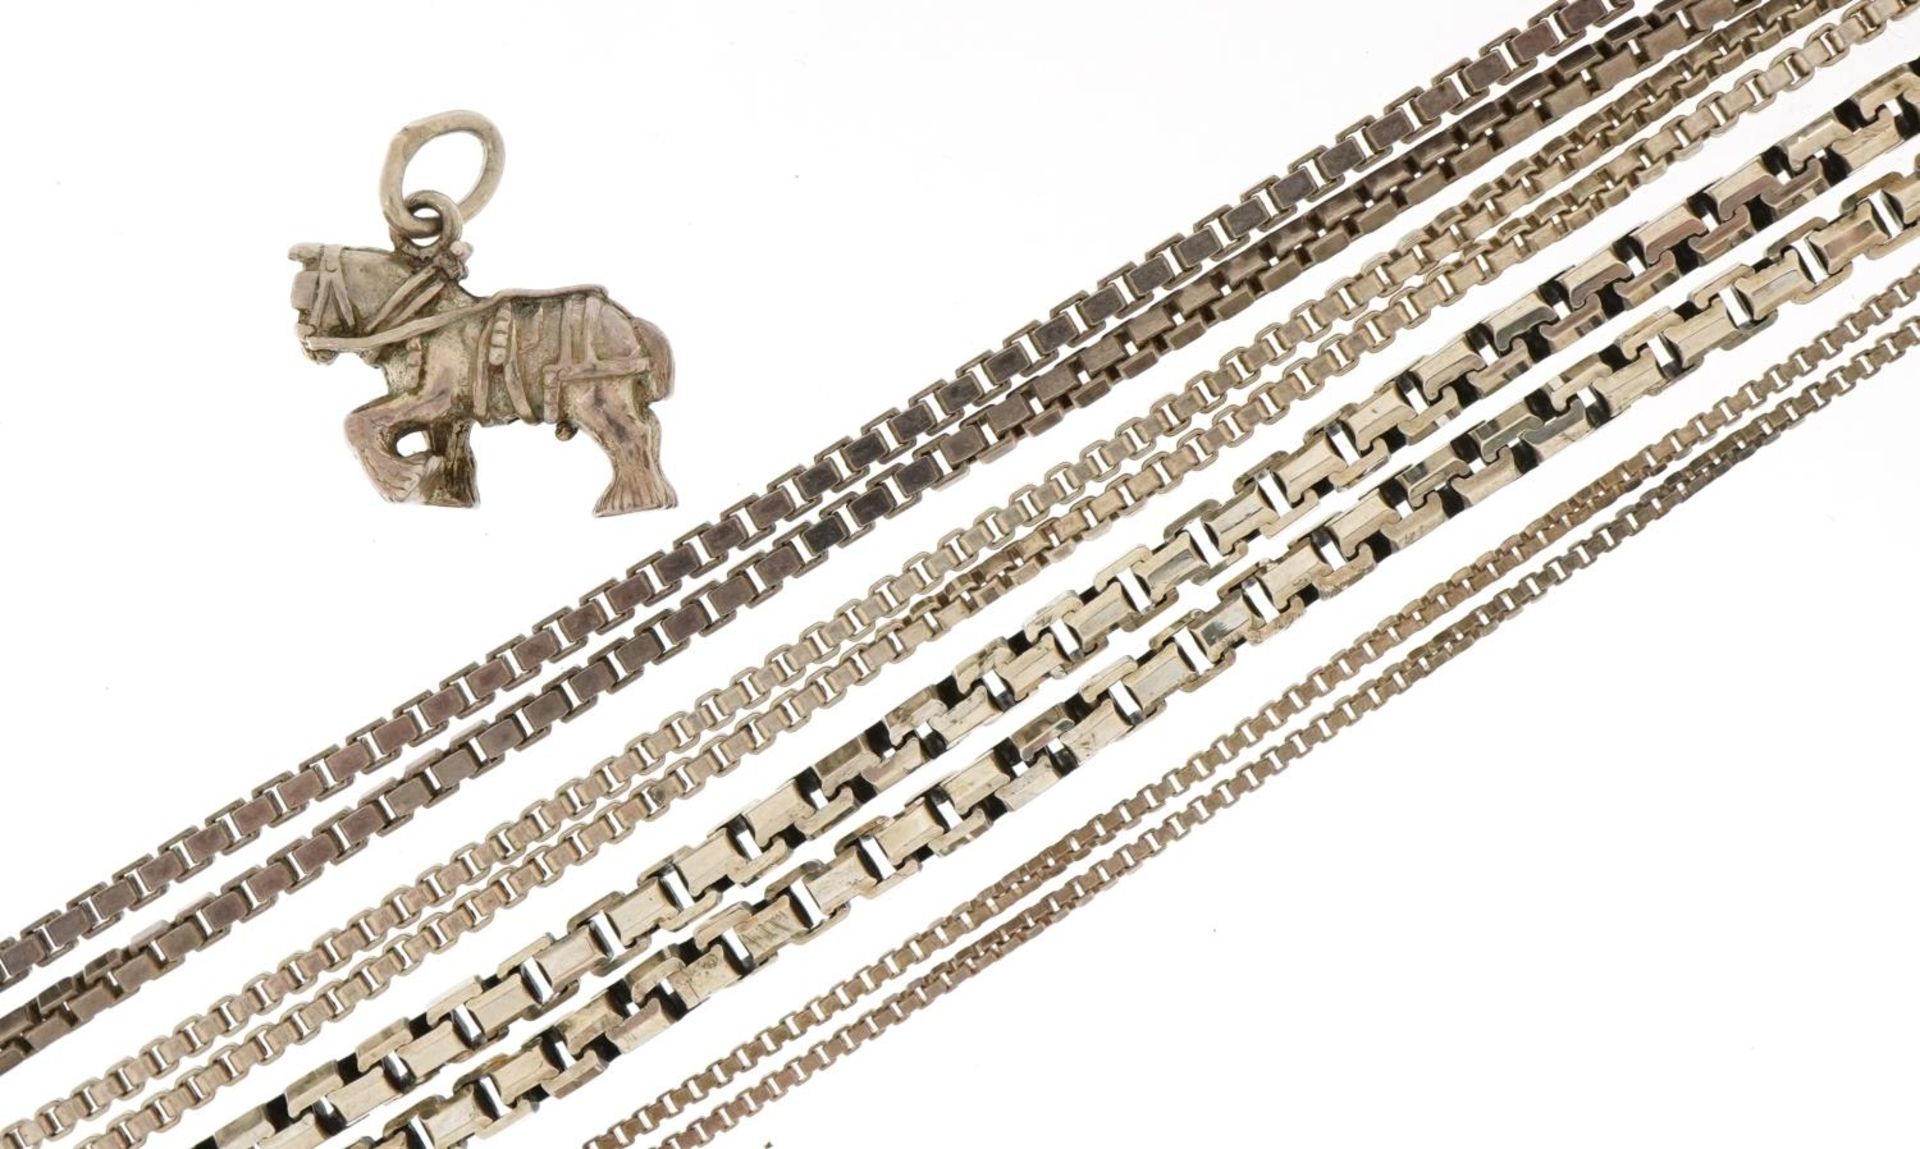 Four silver necklaces and a silver workhorse pendant, the largest 44cm in length, total 41.8g